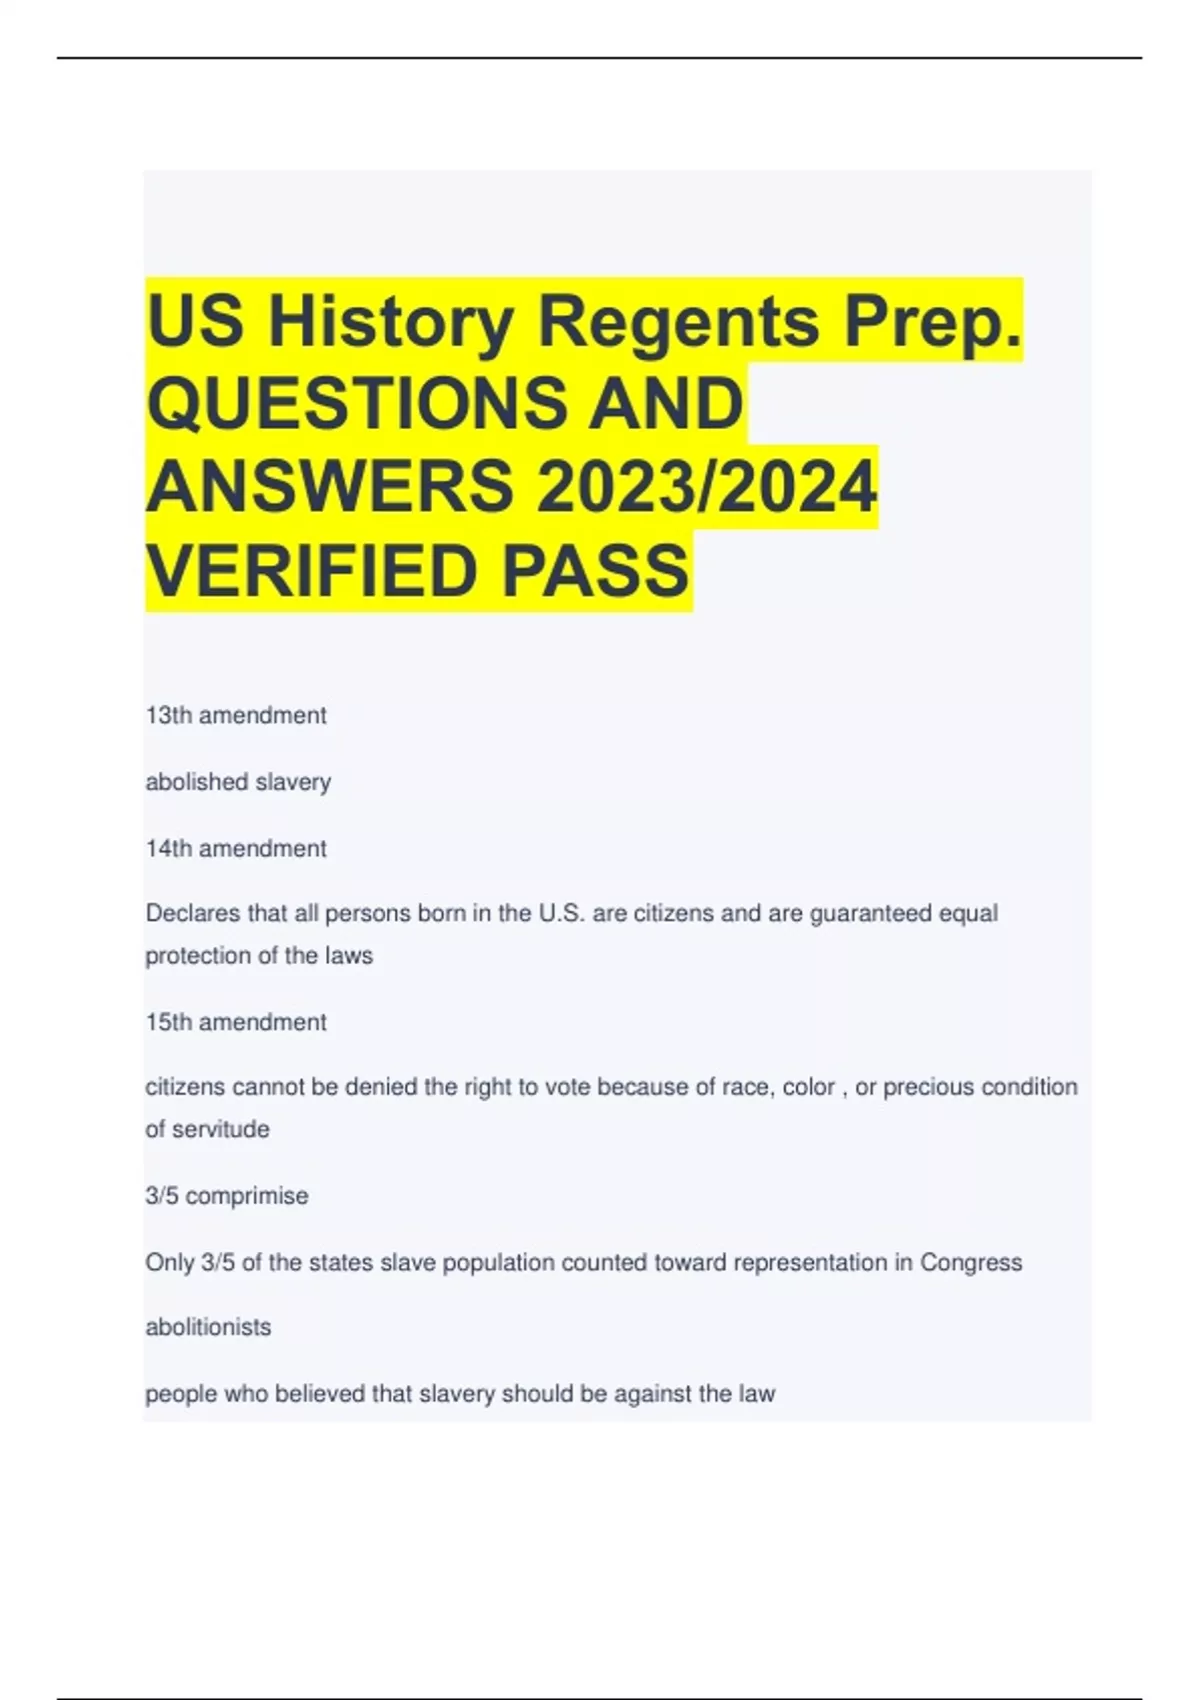 US History Regents Prep. QUESTIONS AND ANSWERS 2023/2024 VERIFIED PASS